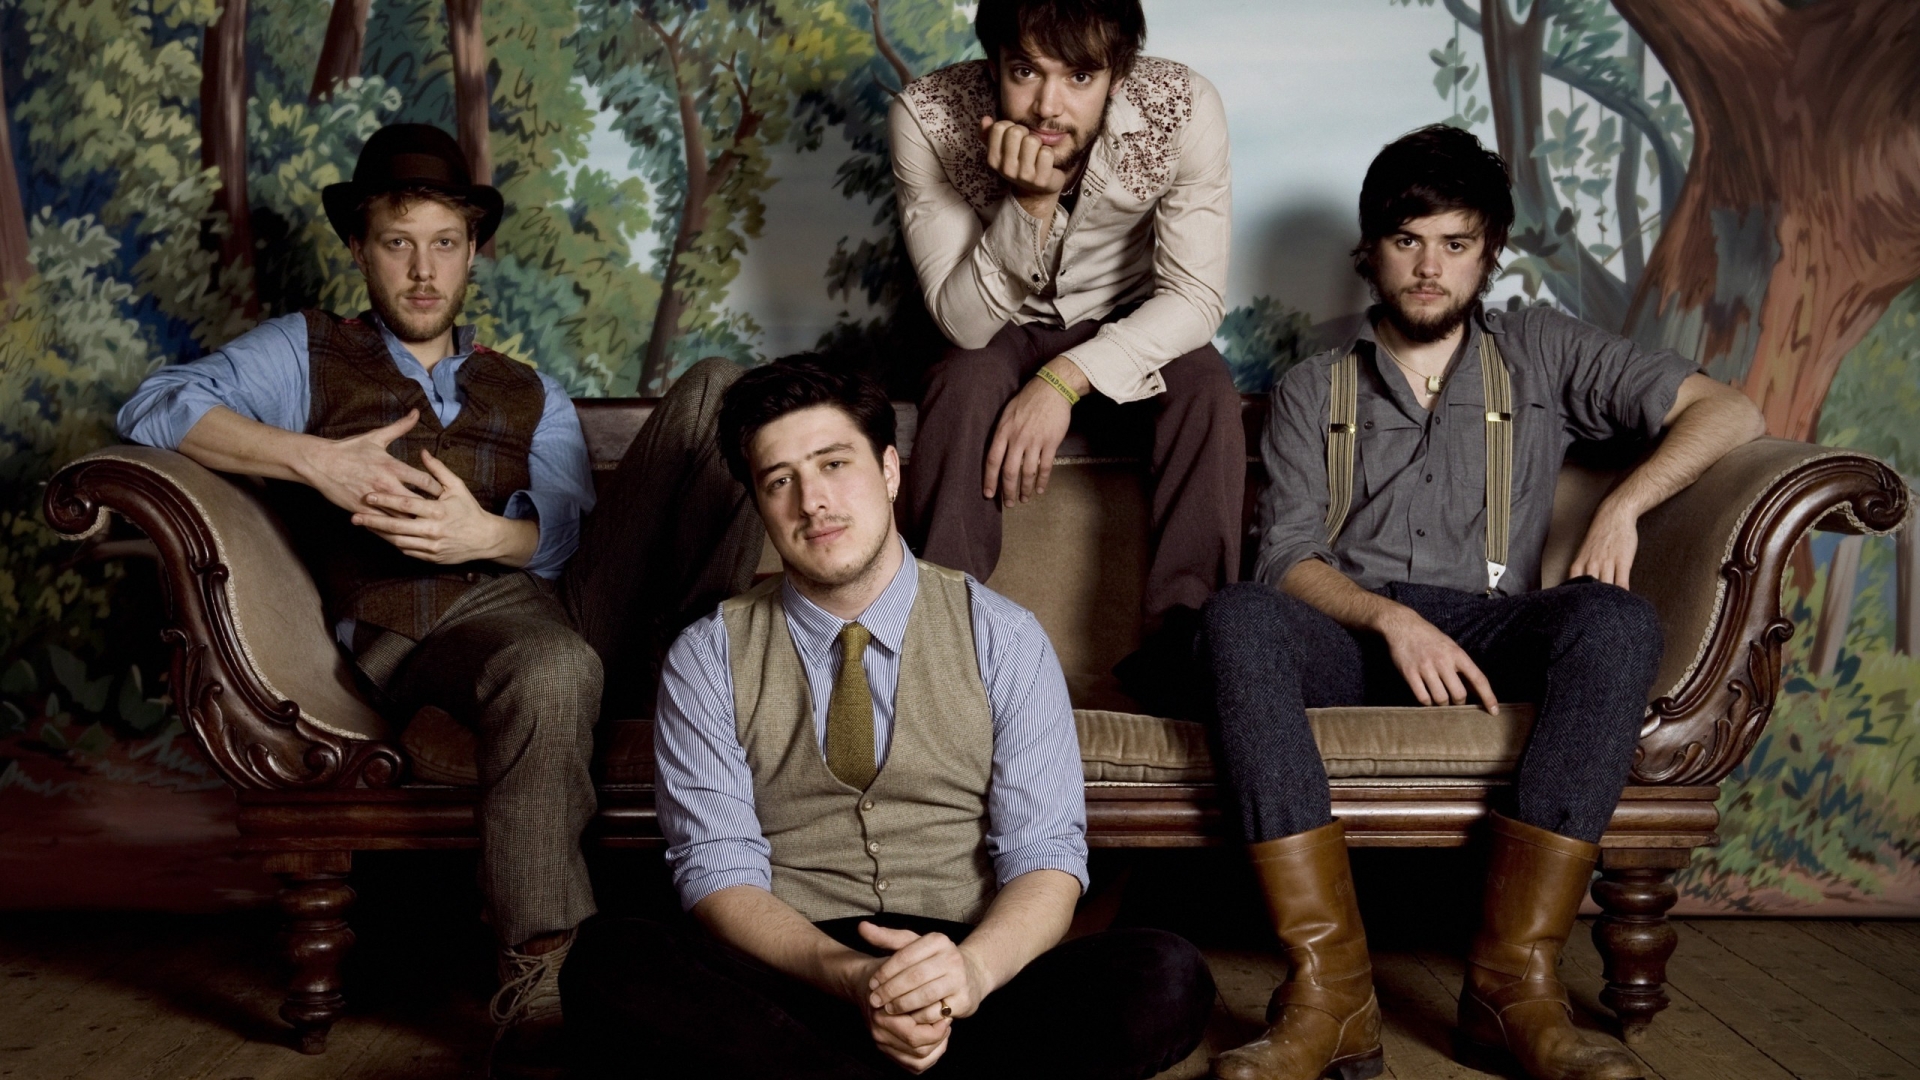 Mumford and Sons for 1920 x 1080 HDTV 1080p resolution